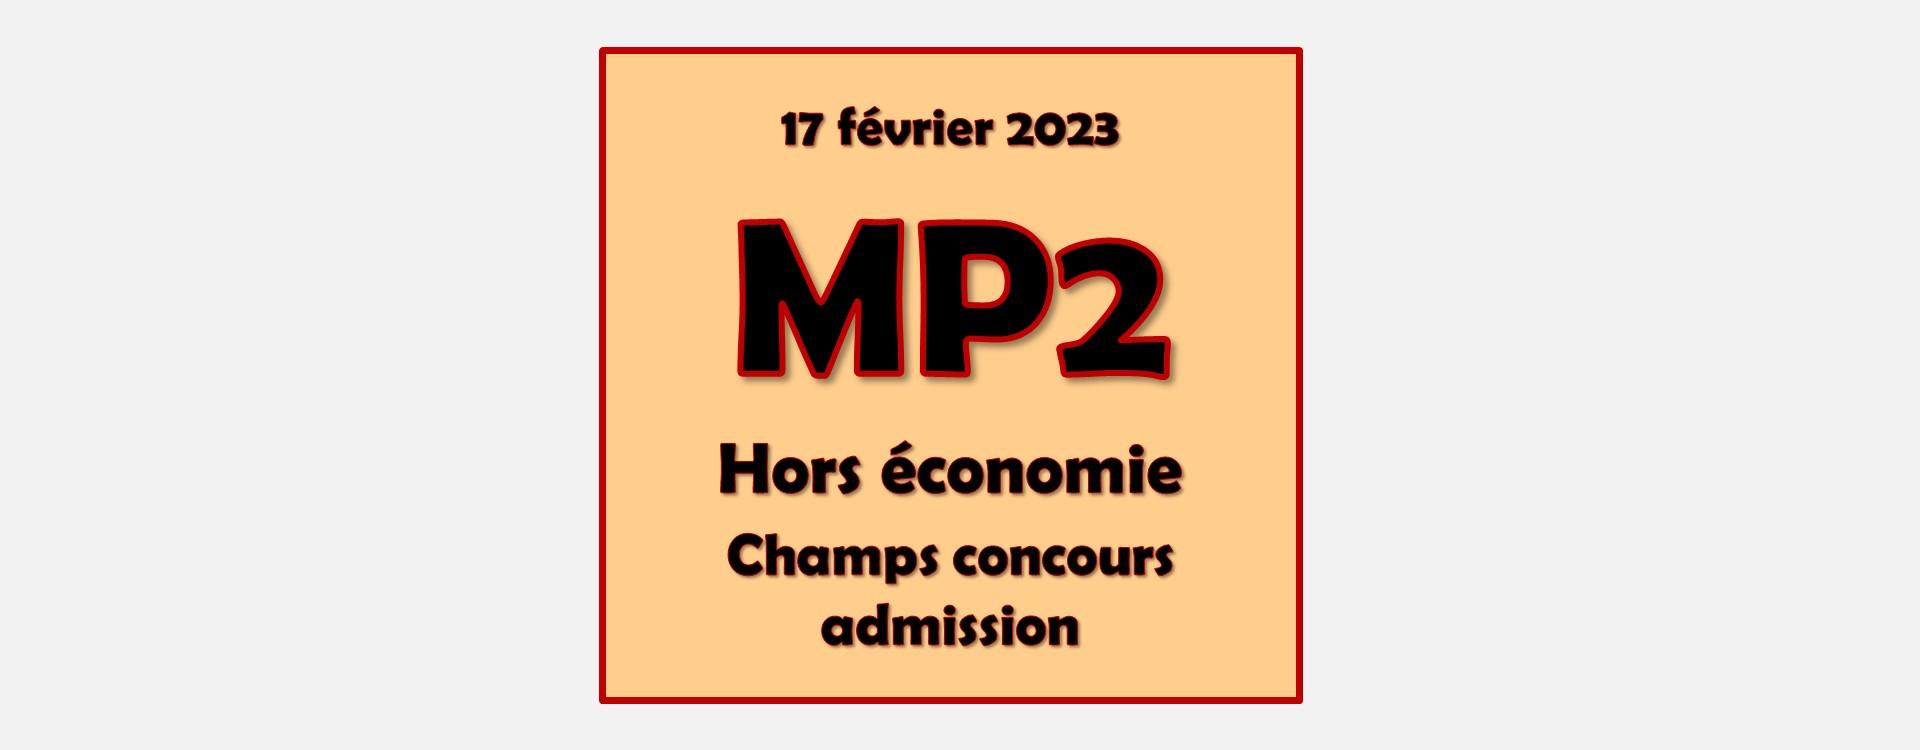 MP2 - Champs concours admission